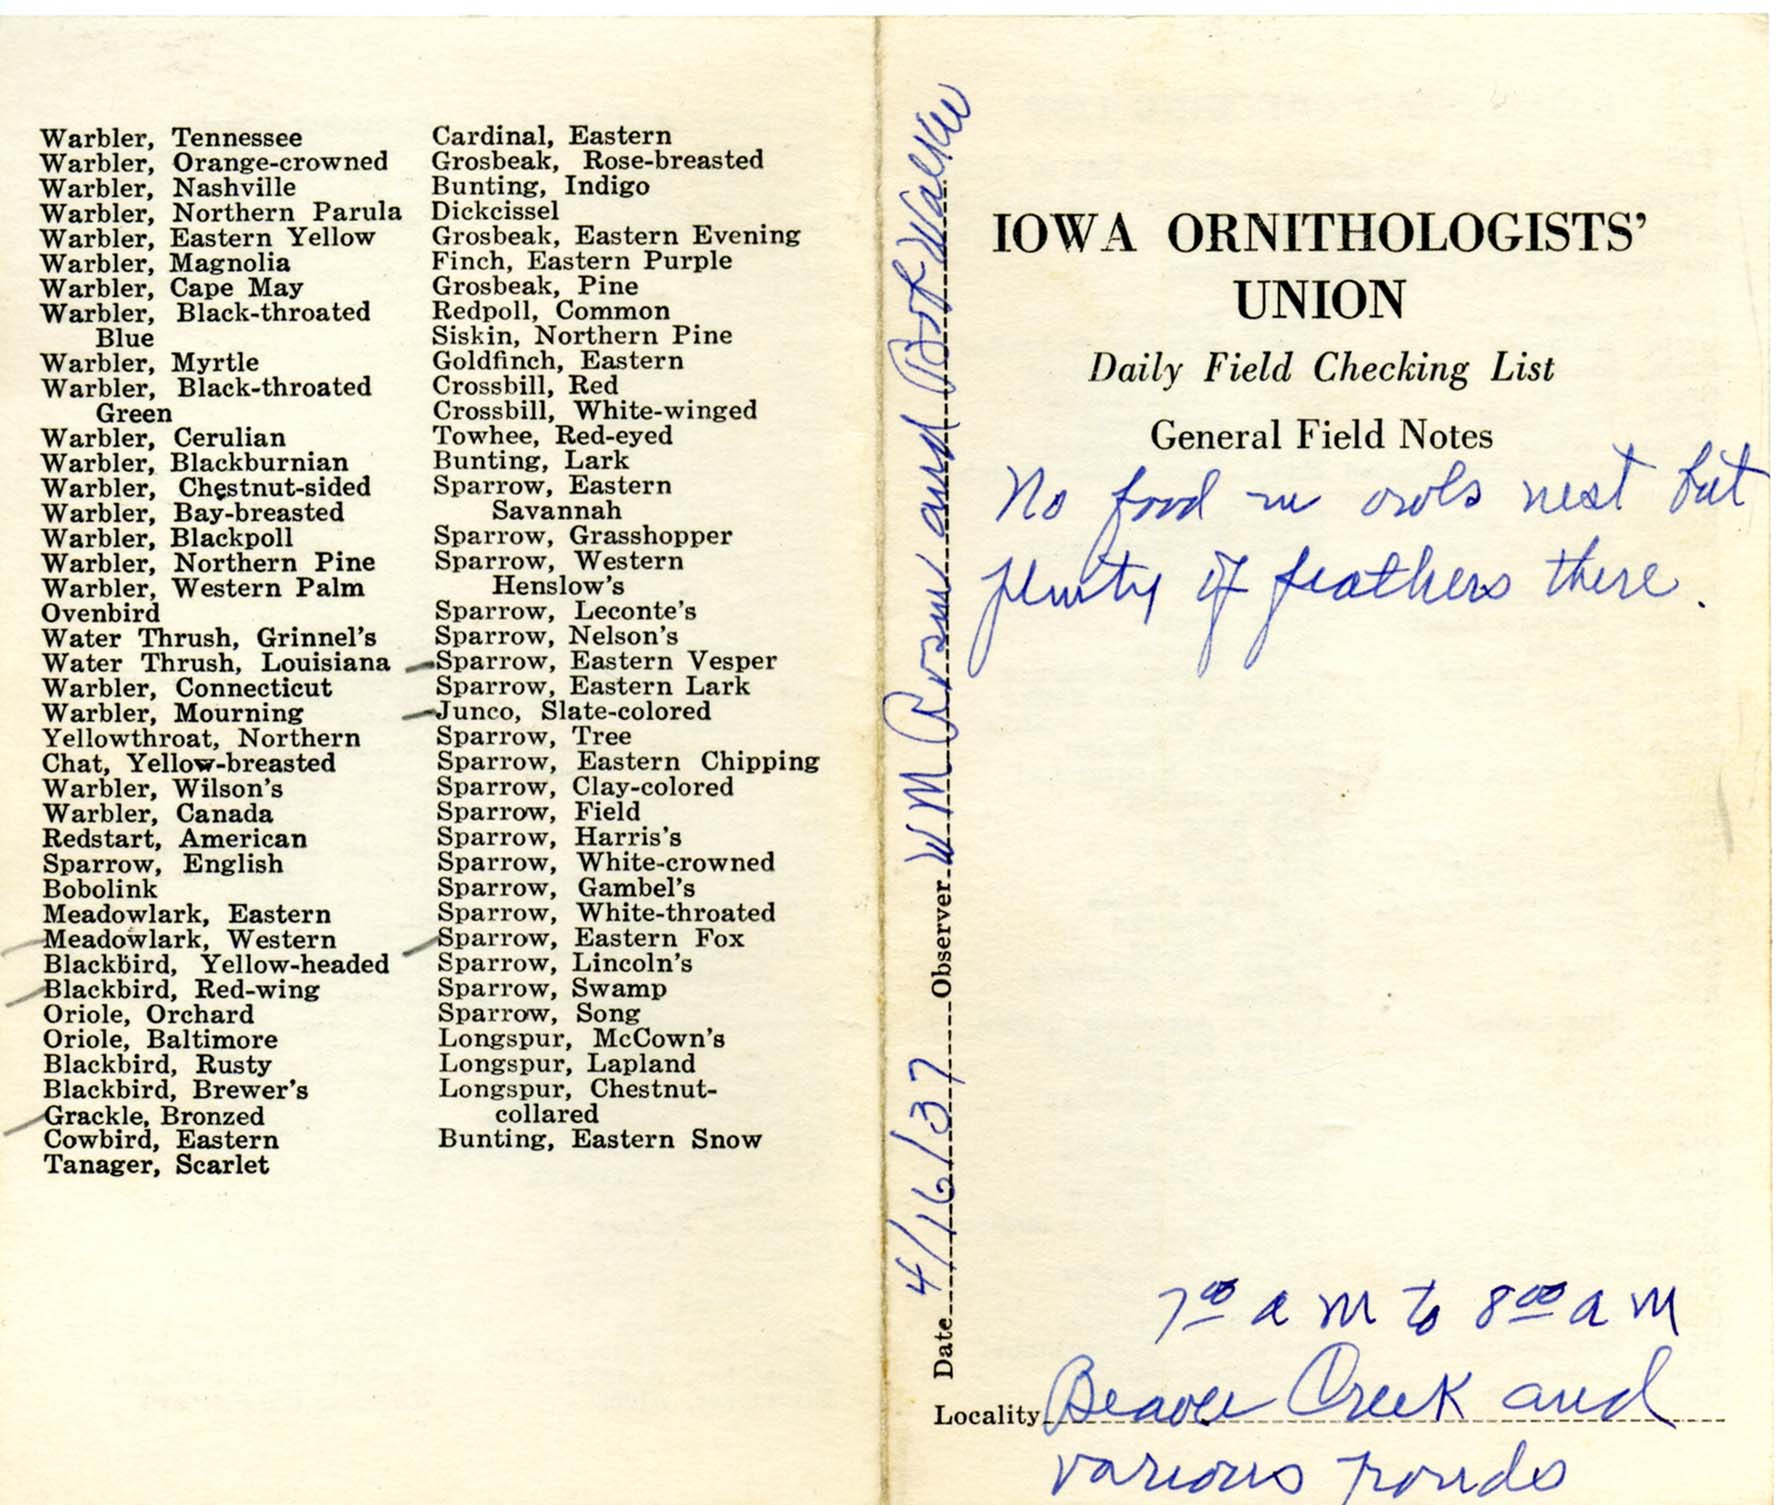 Daily field checking list by Walter Rosene, April 16, 1937